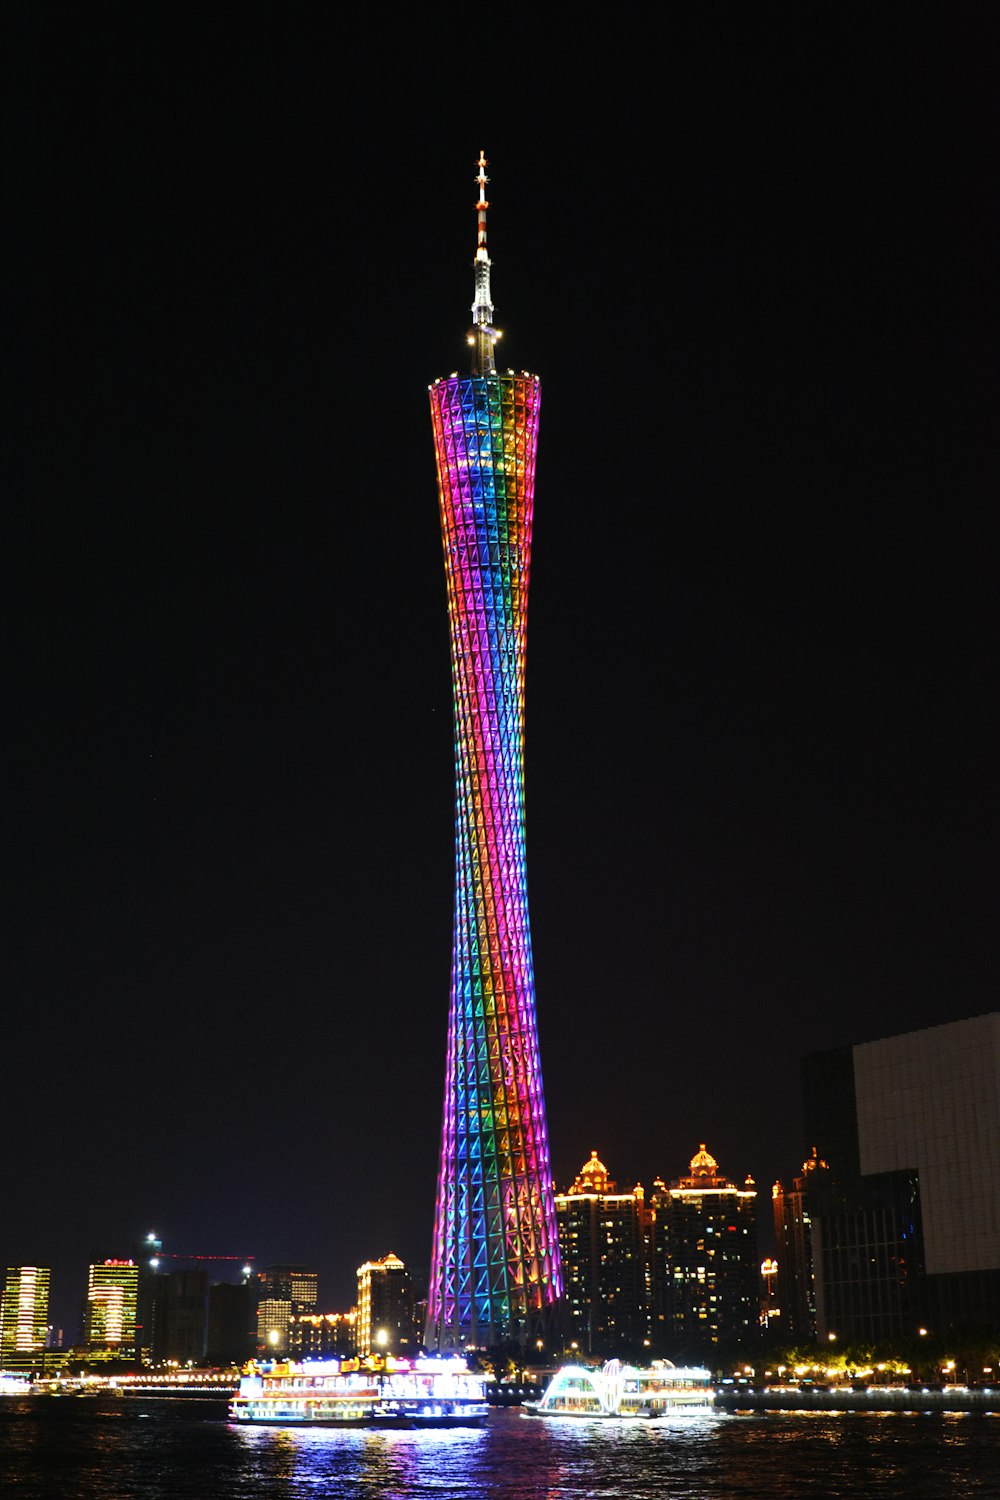 lighted spiral tower during nighttime